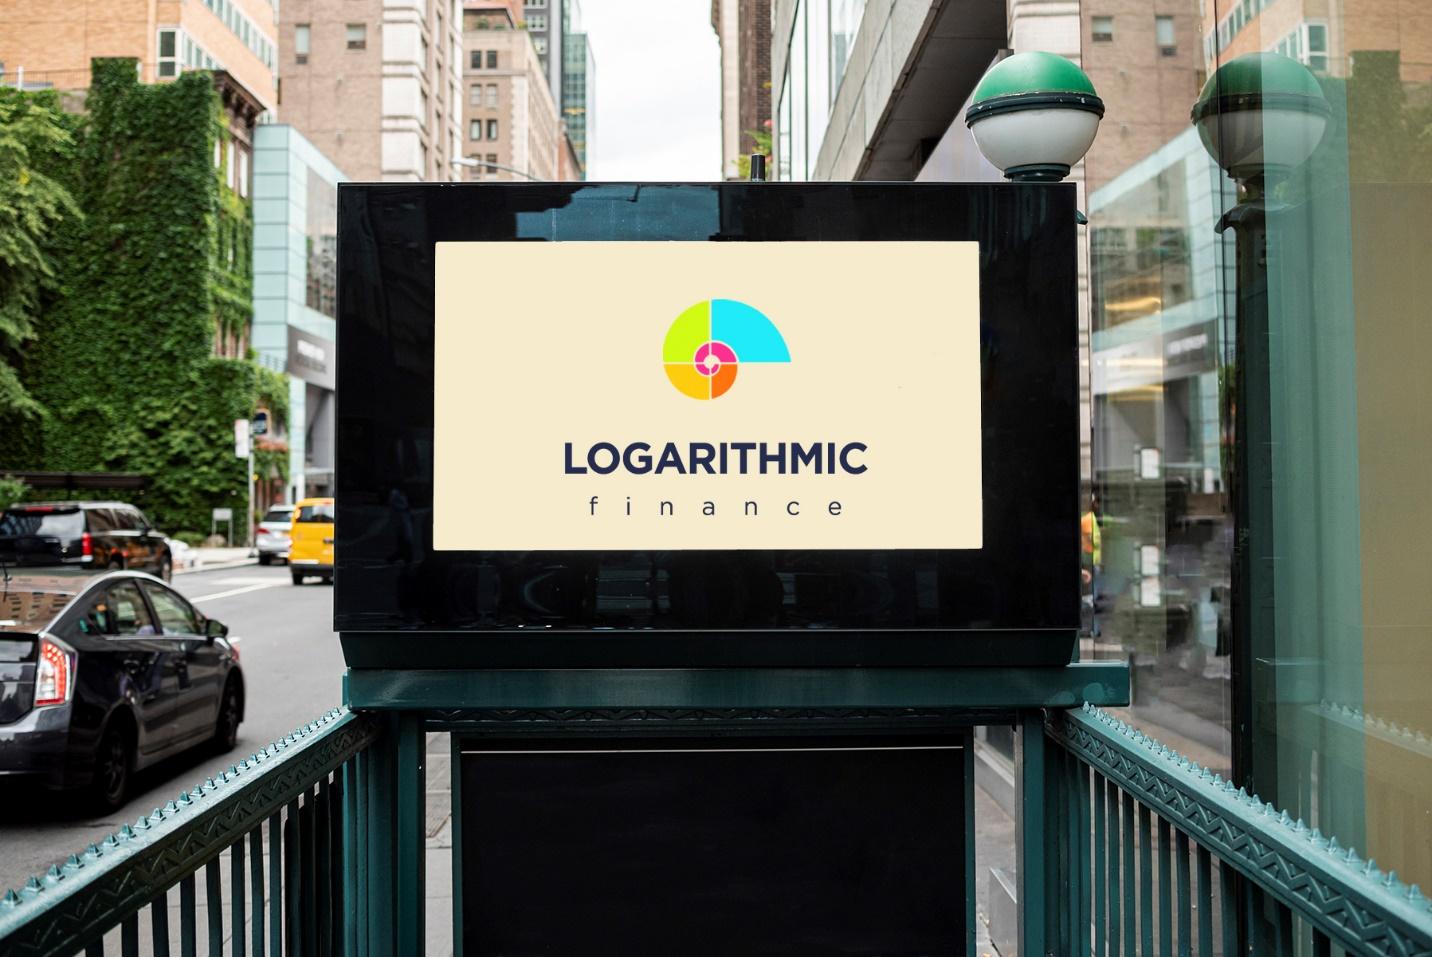 3 CRYPTOCURRENCIES TO PUT UP ON YOUR WATCHLIST: LOGARITHMIC FINANCE (LOG), CHAINLINK (LINK), AND THETA NETWORKS (THETA)